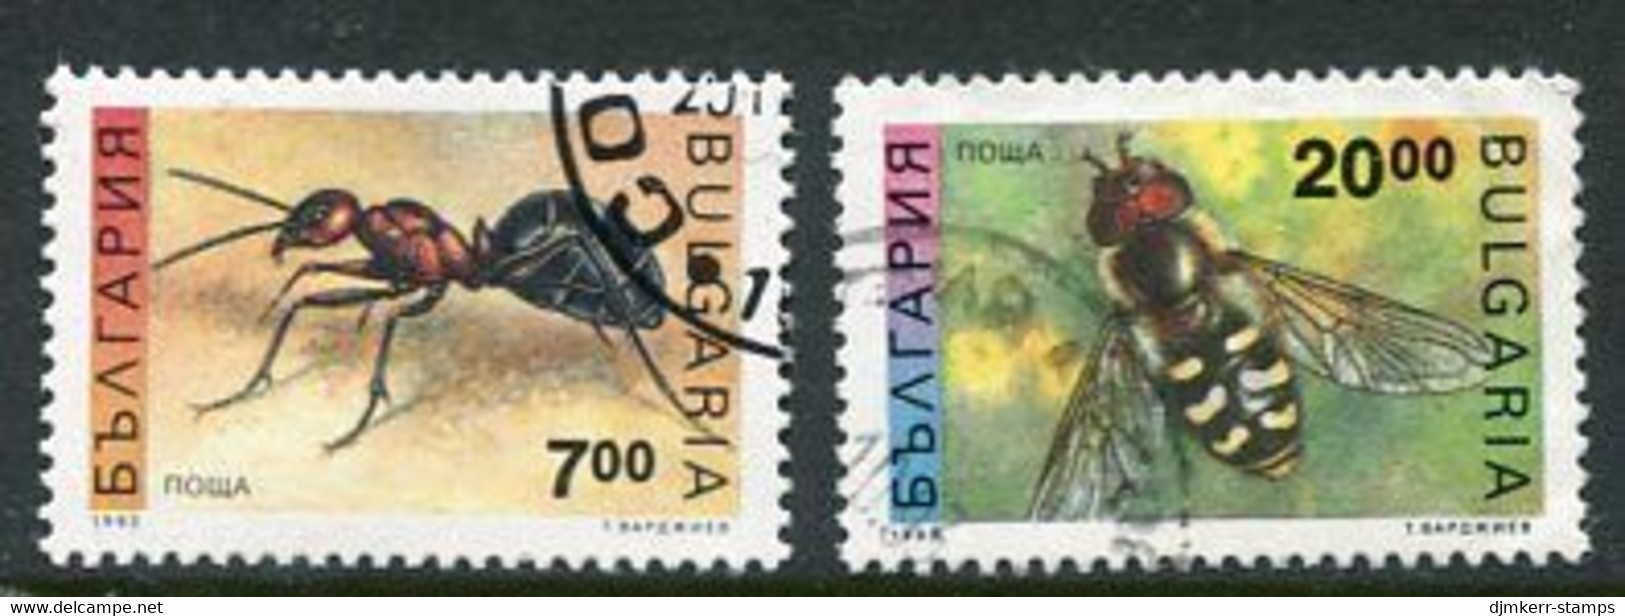 BULGARIA 1992 Insect Definitive 7, 20 L. Used.  Michel 3998-99 - Usados